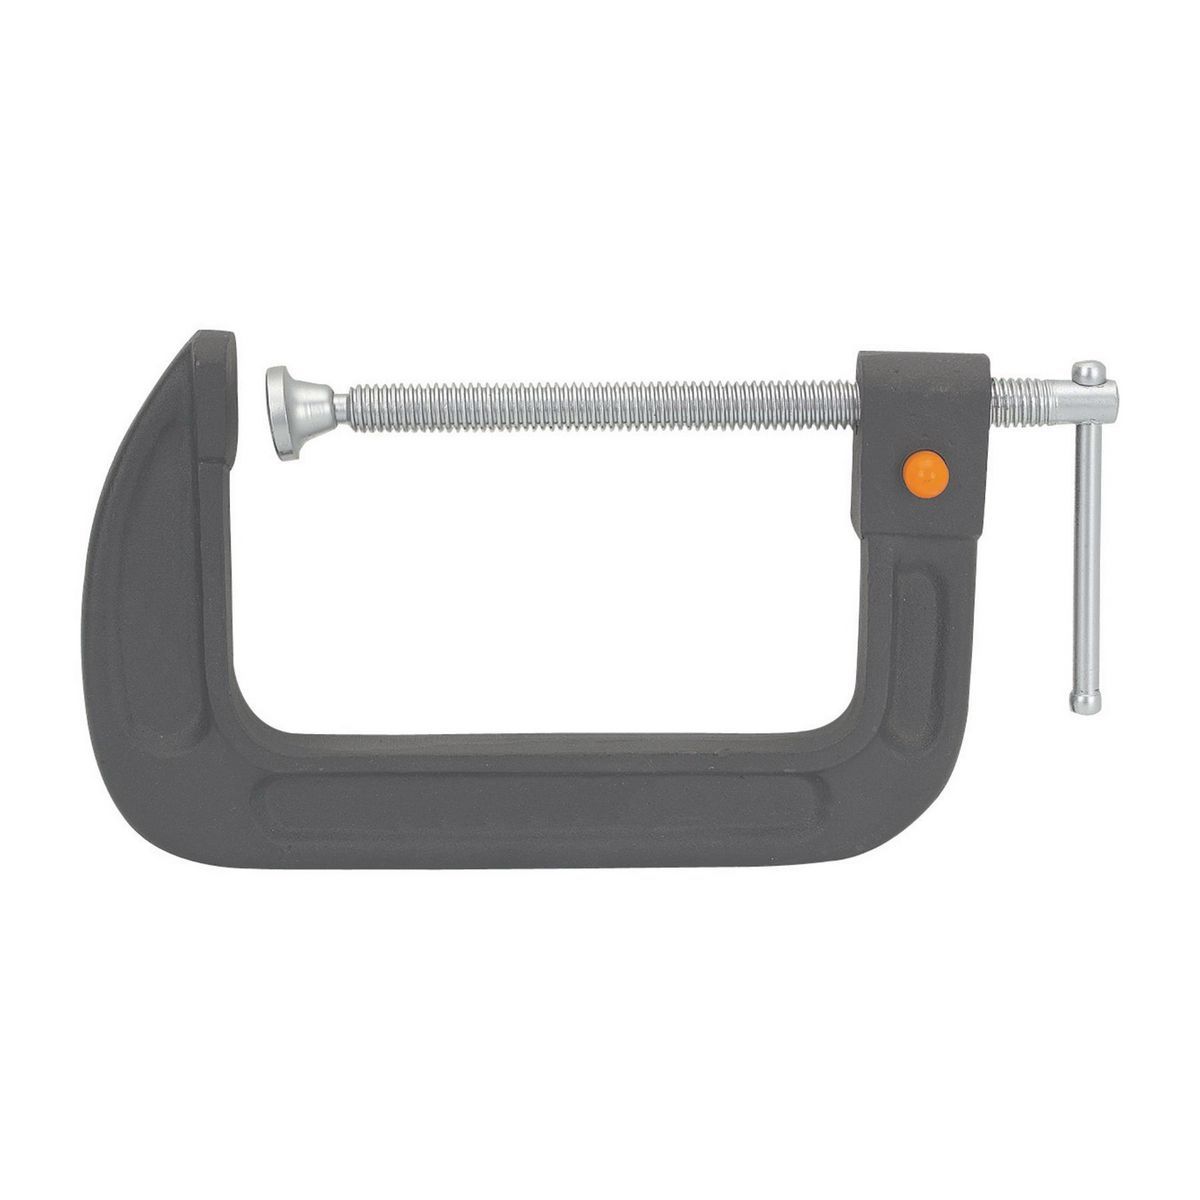 PITTSBURGH 6" Quick-Release C-Clamp